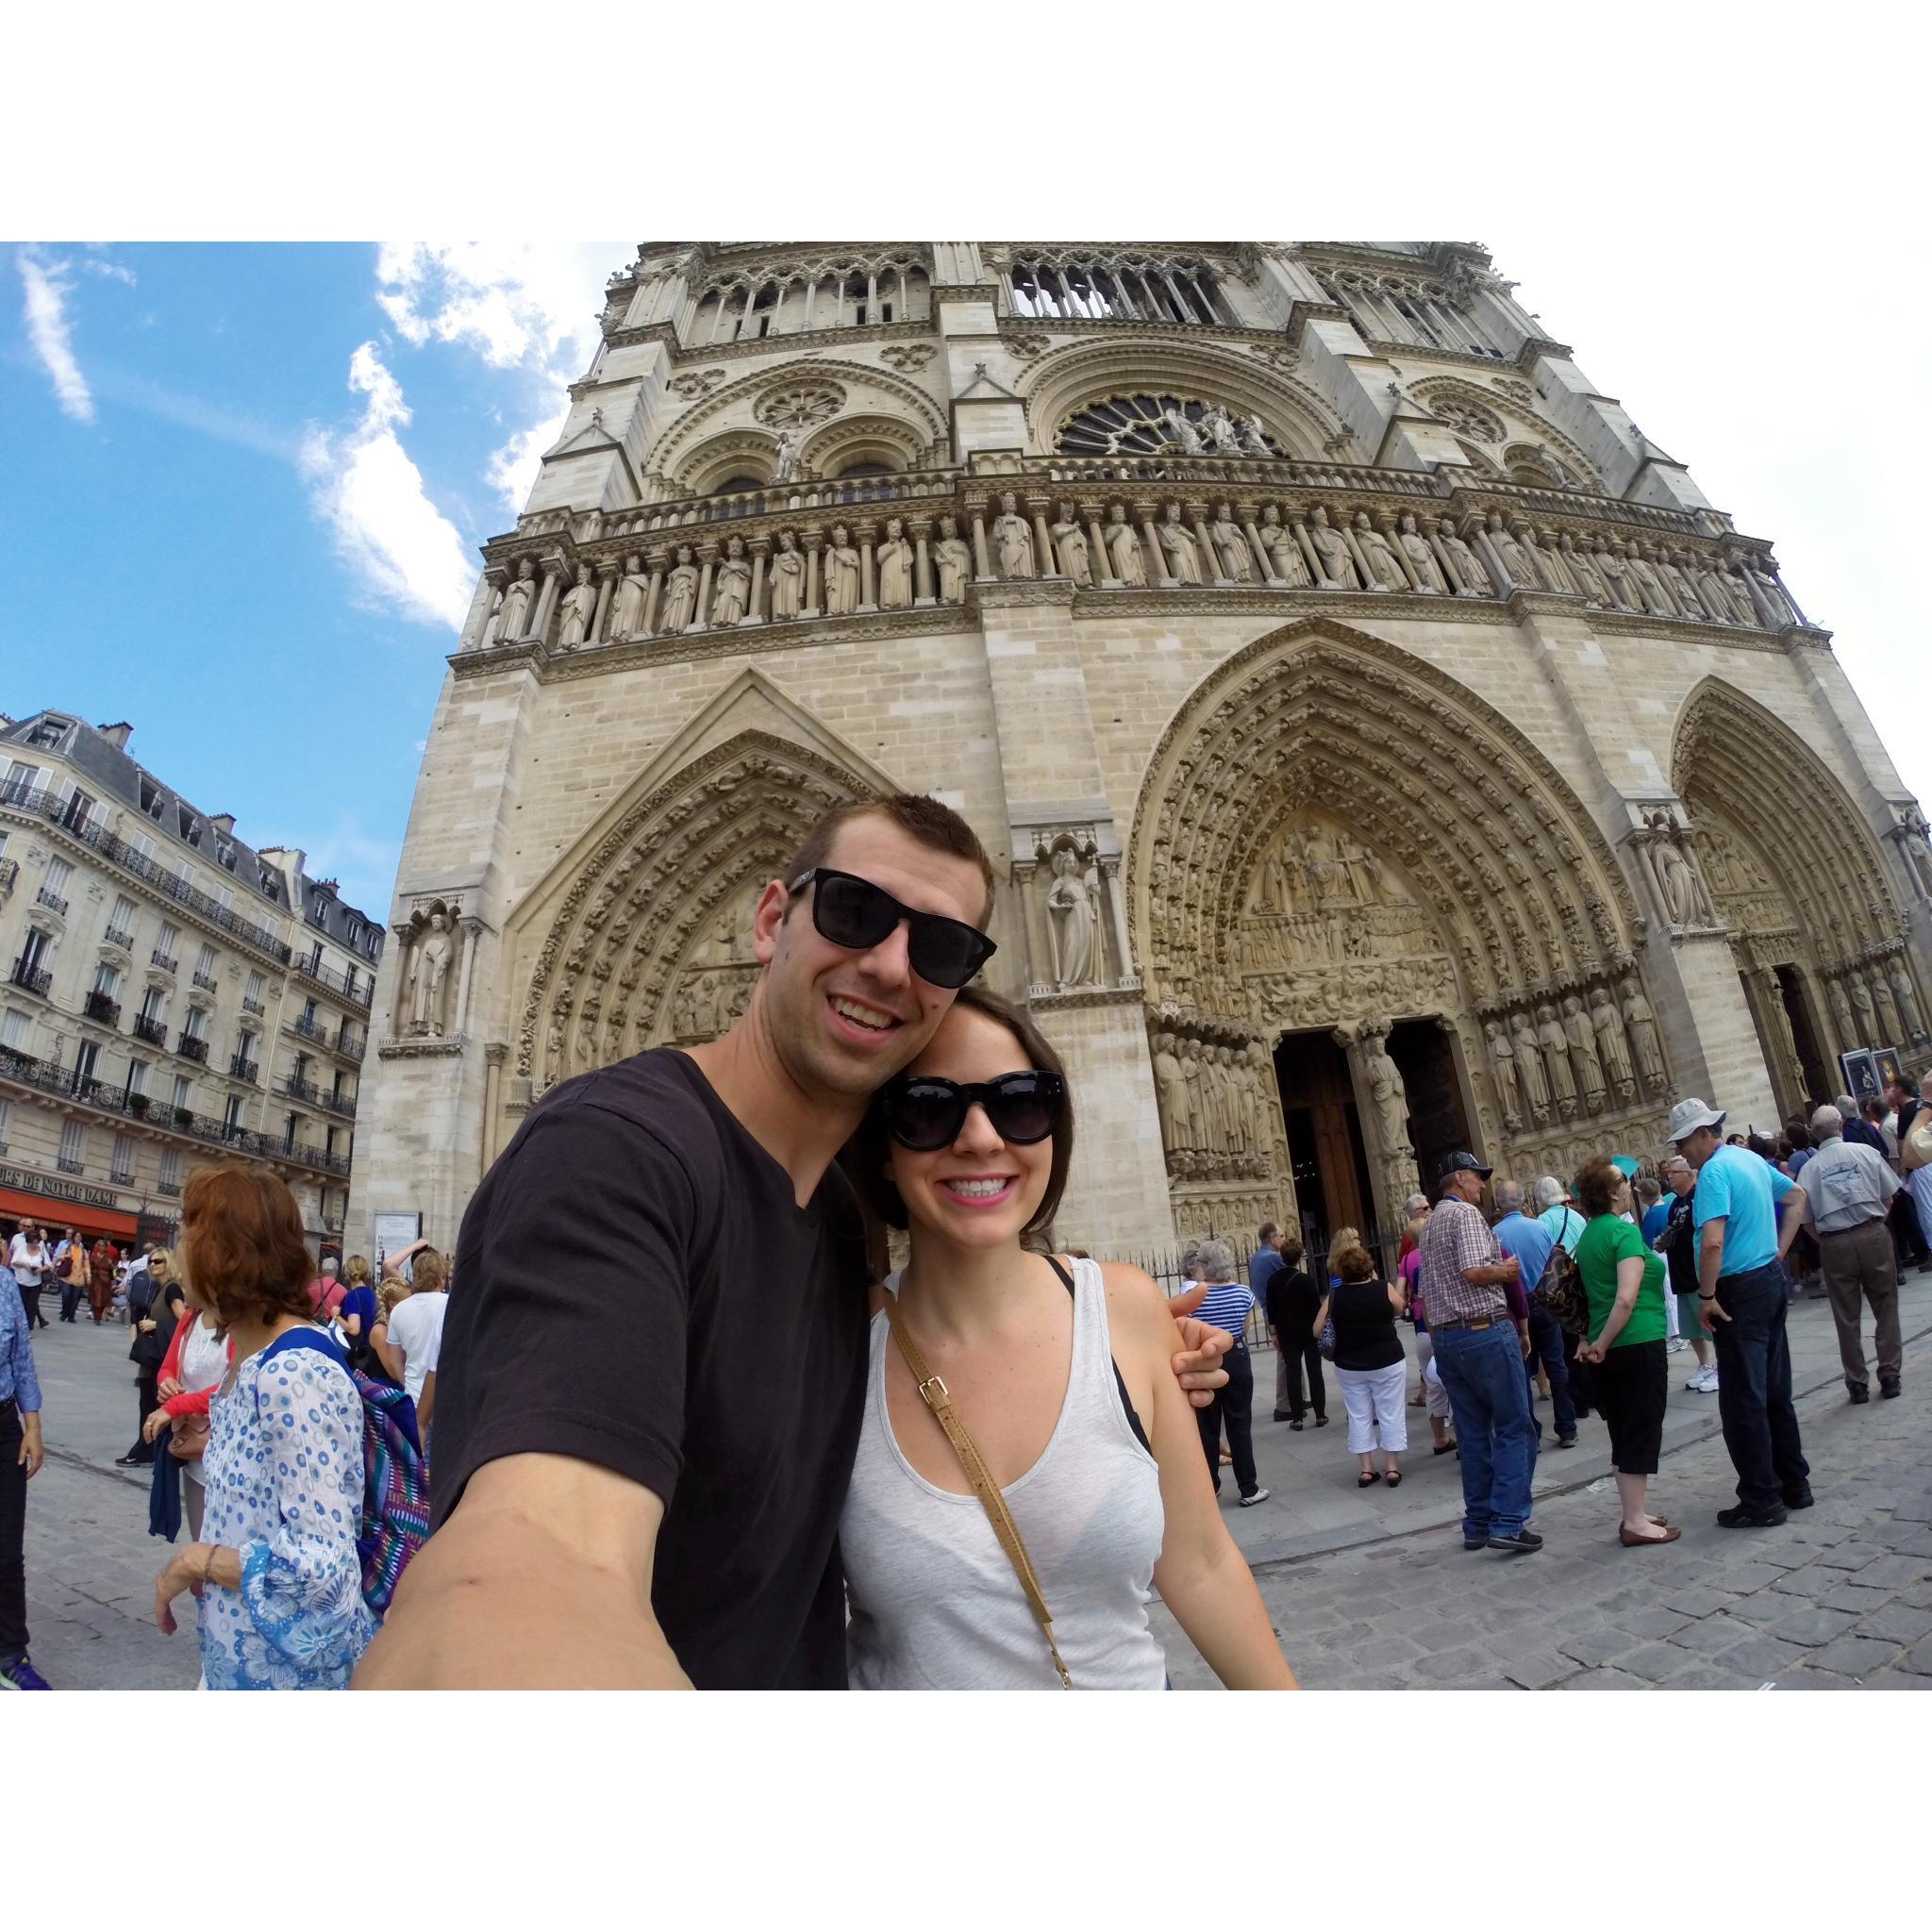 Our first trip abroad and to Paris!